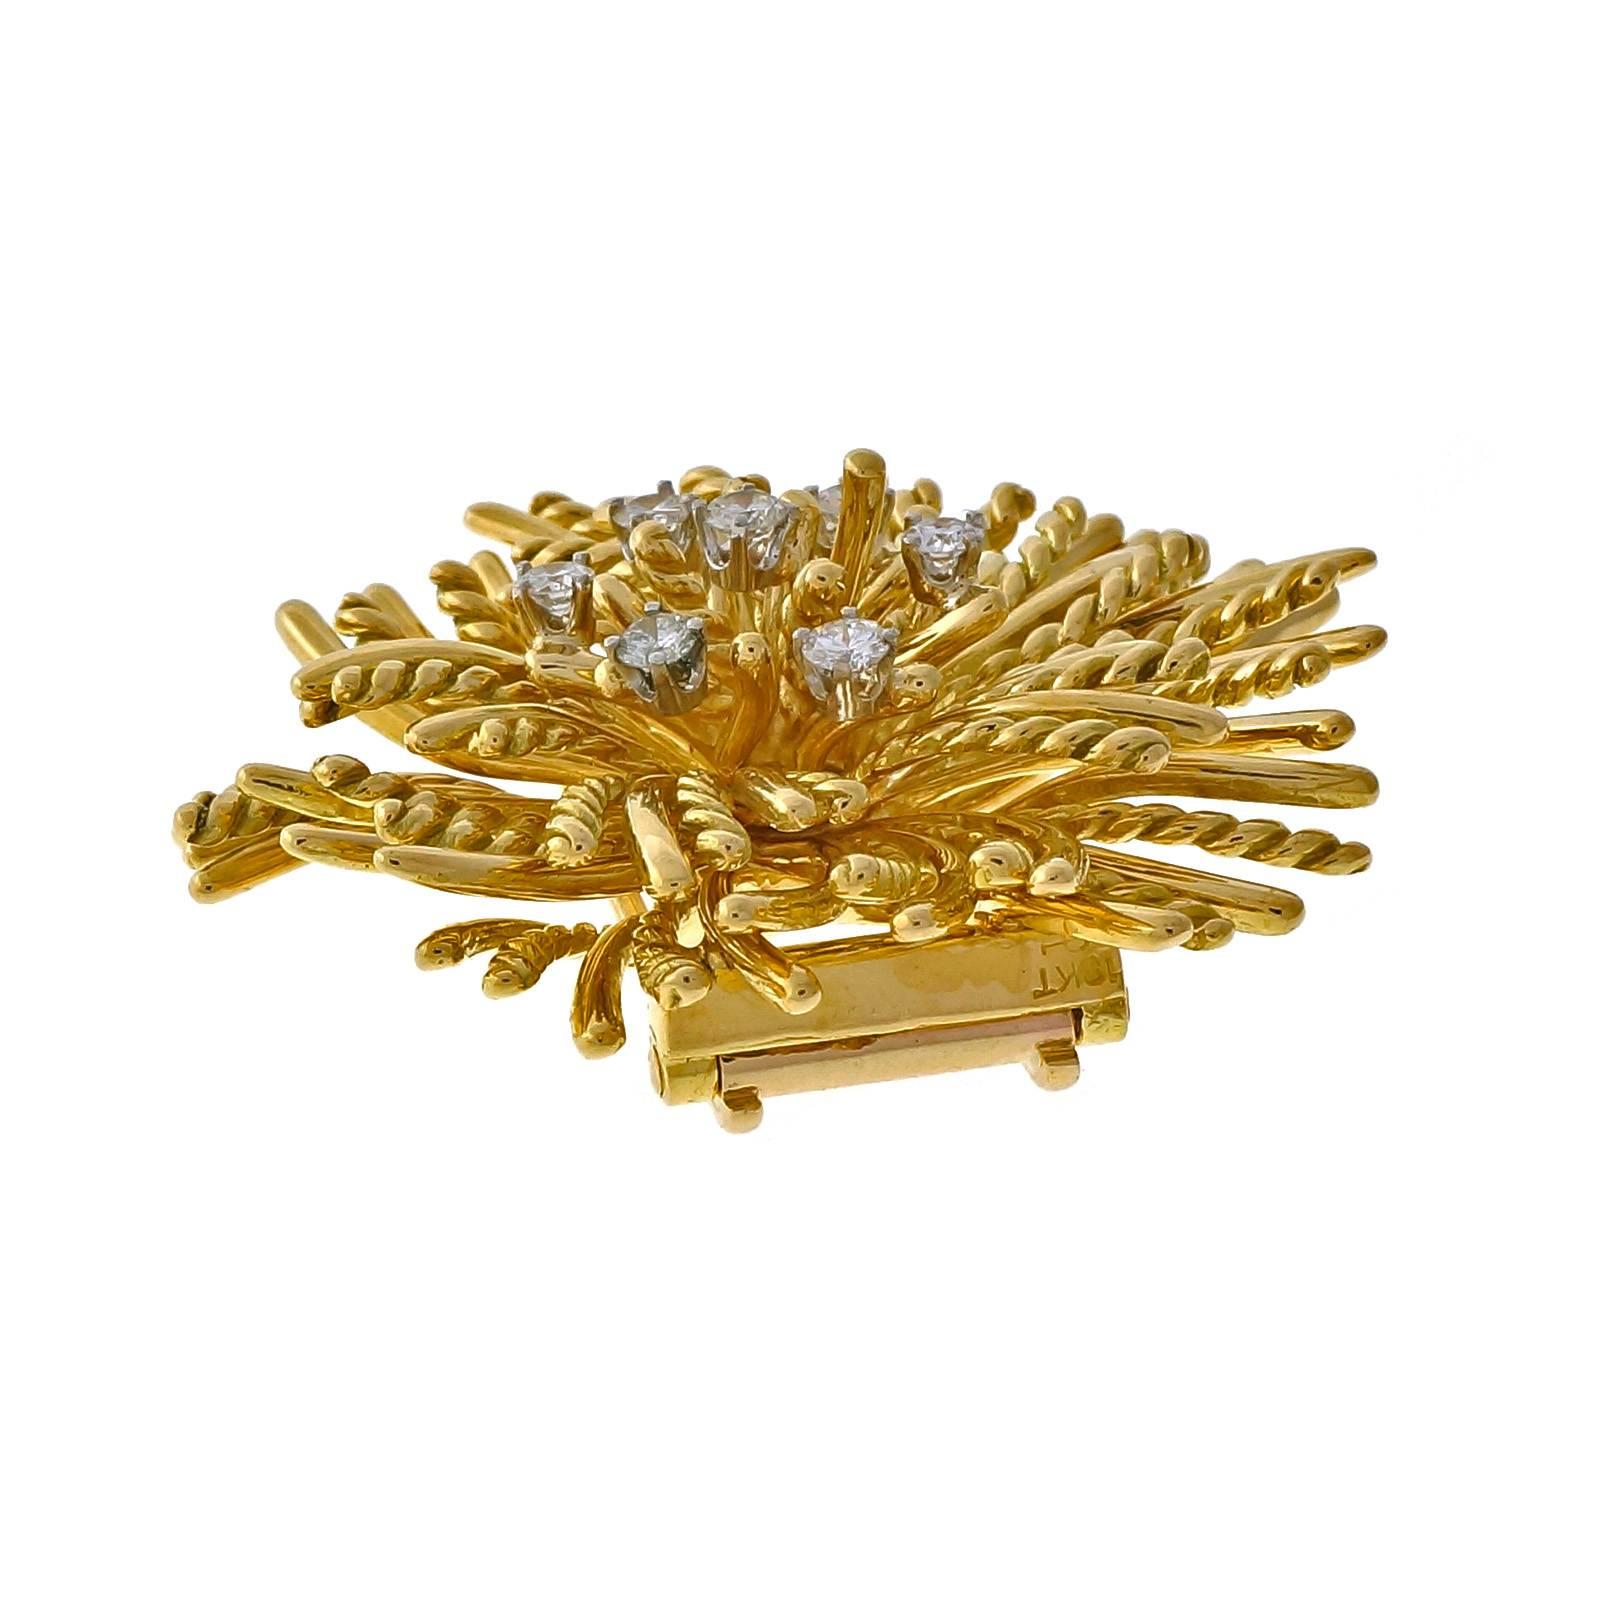 Authentic Tiffany & Co Anemone 18k yellow gold diamond double clip pin. 

7 round diamonds, approx. total weight .50cts, F, VS
18k yellow gold
Tested and stamped: 18k 
Hallmark: 5004 Tiffany & Co23.6 grams
Top to bottom: 37.81mm or 1.49 inches